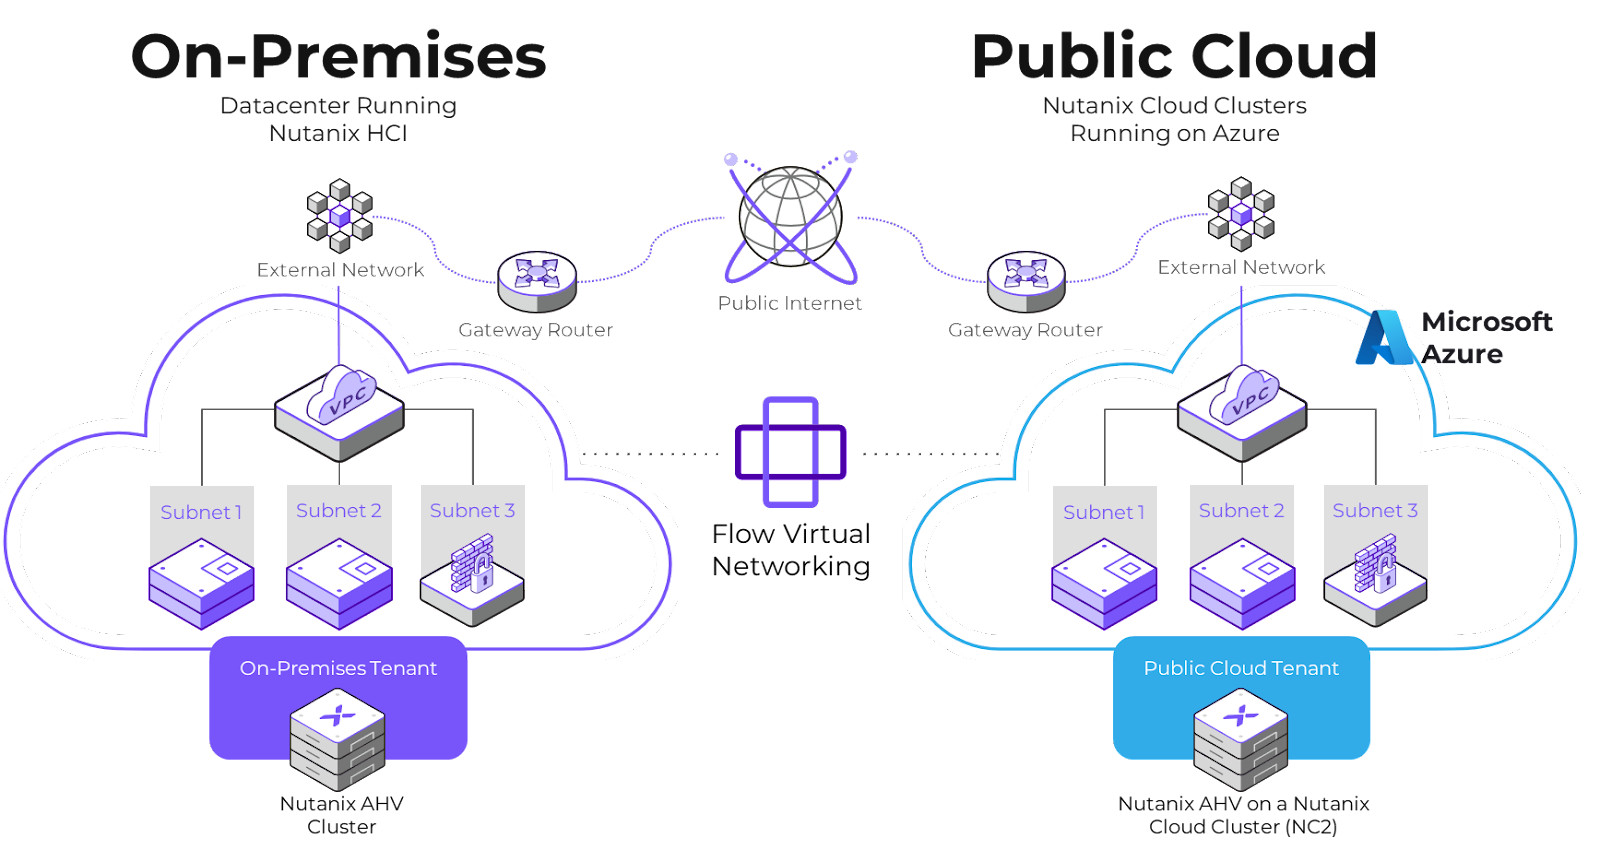 Flow Virtual Networking and Nutanix Cloud Clusters (NC2)